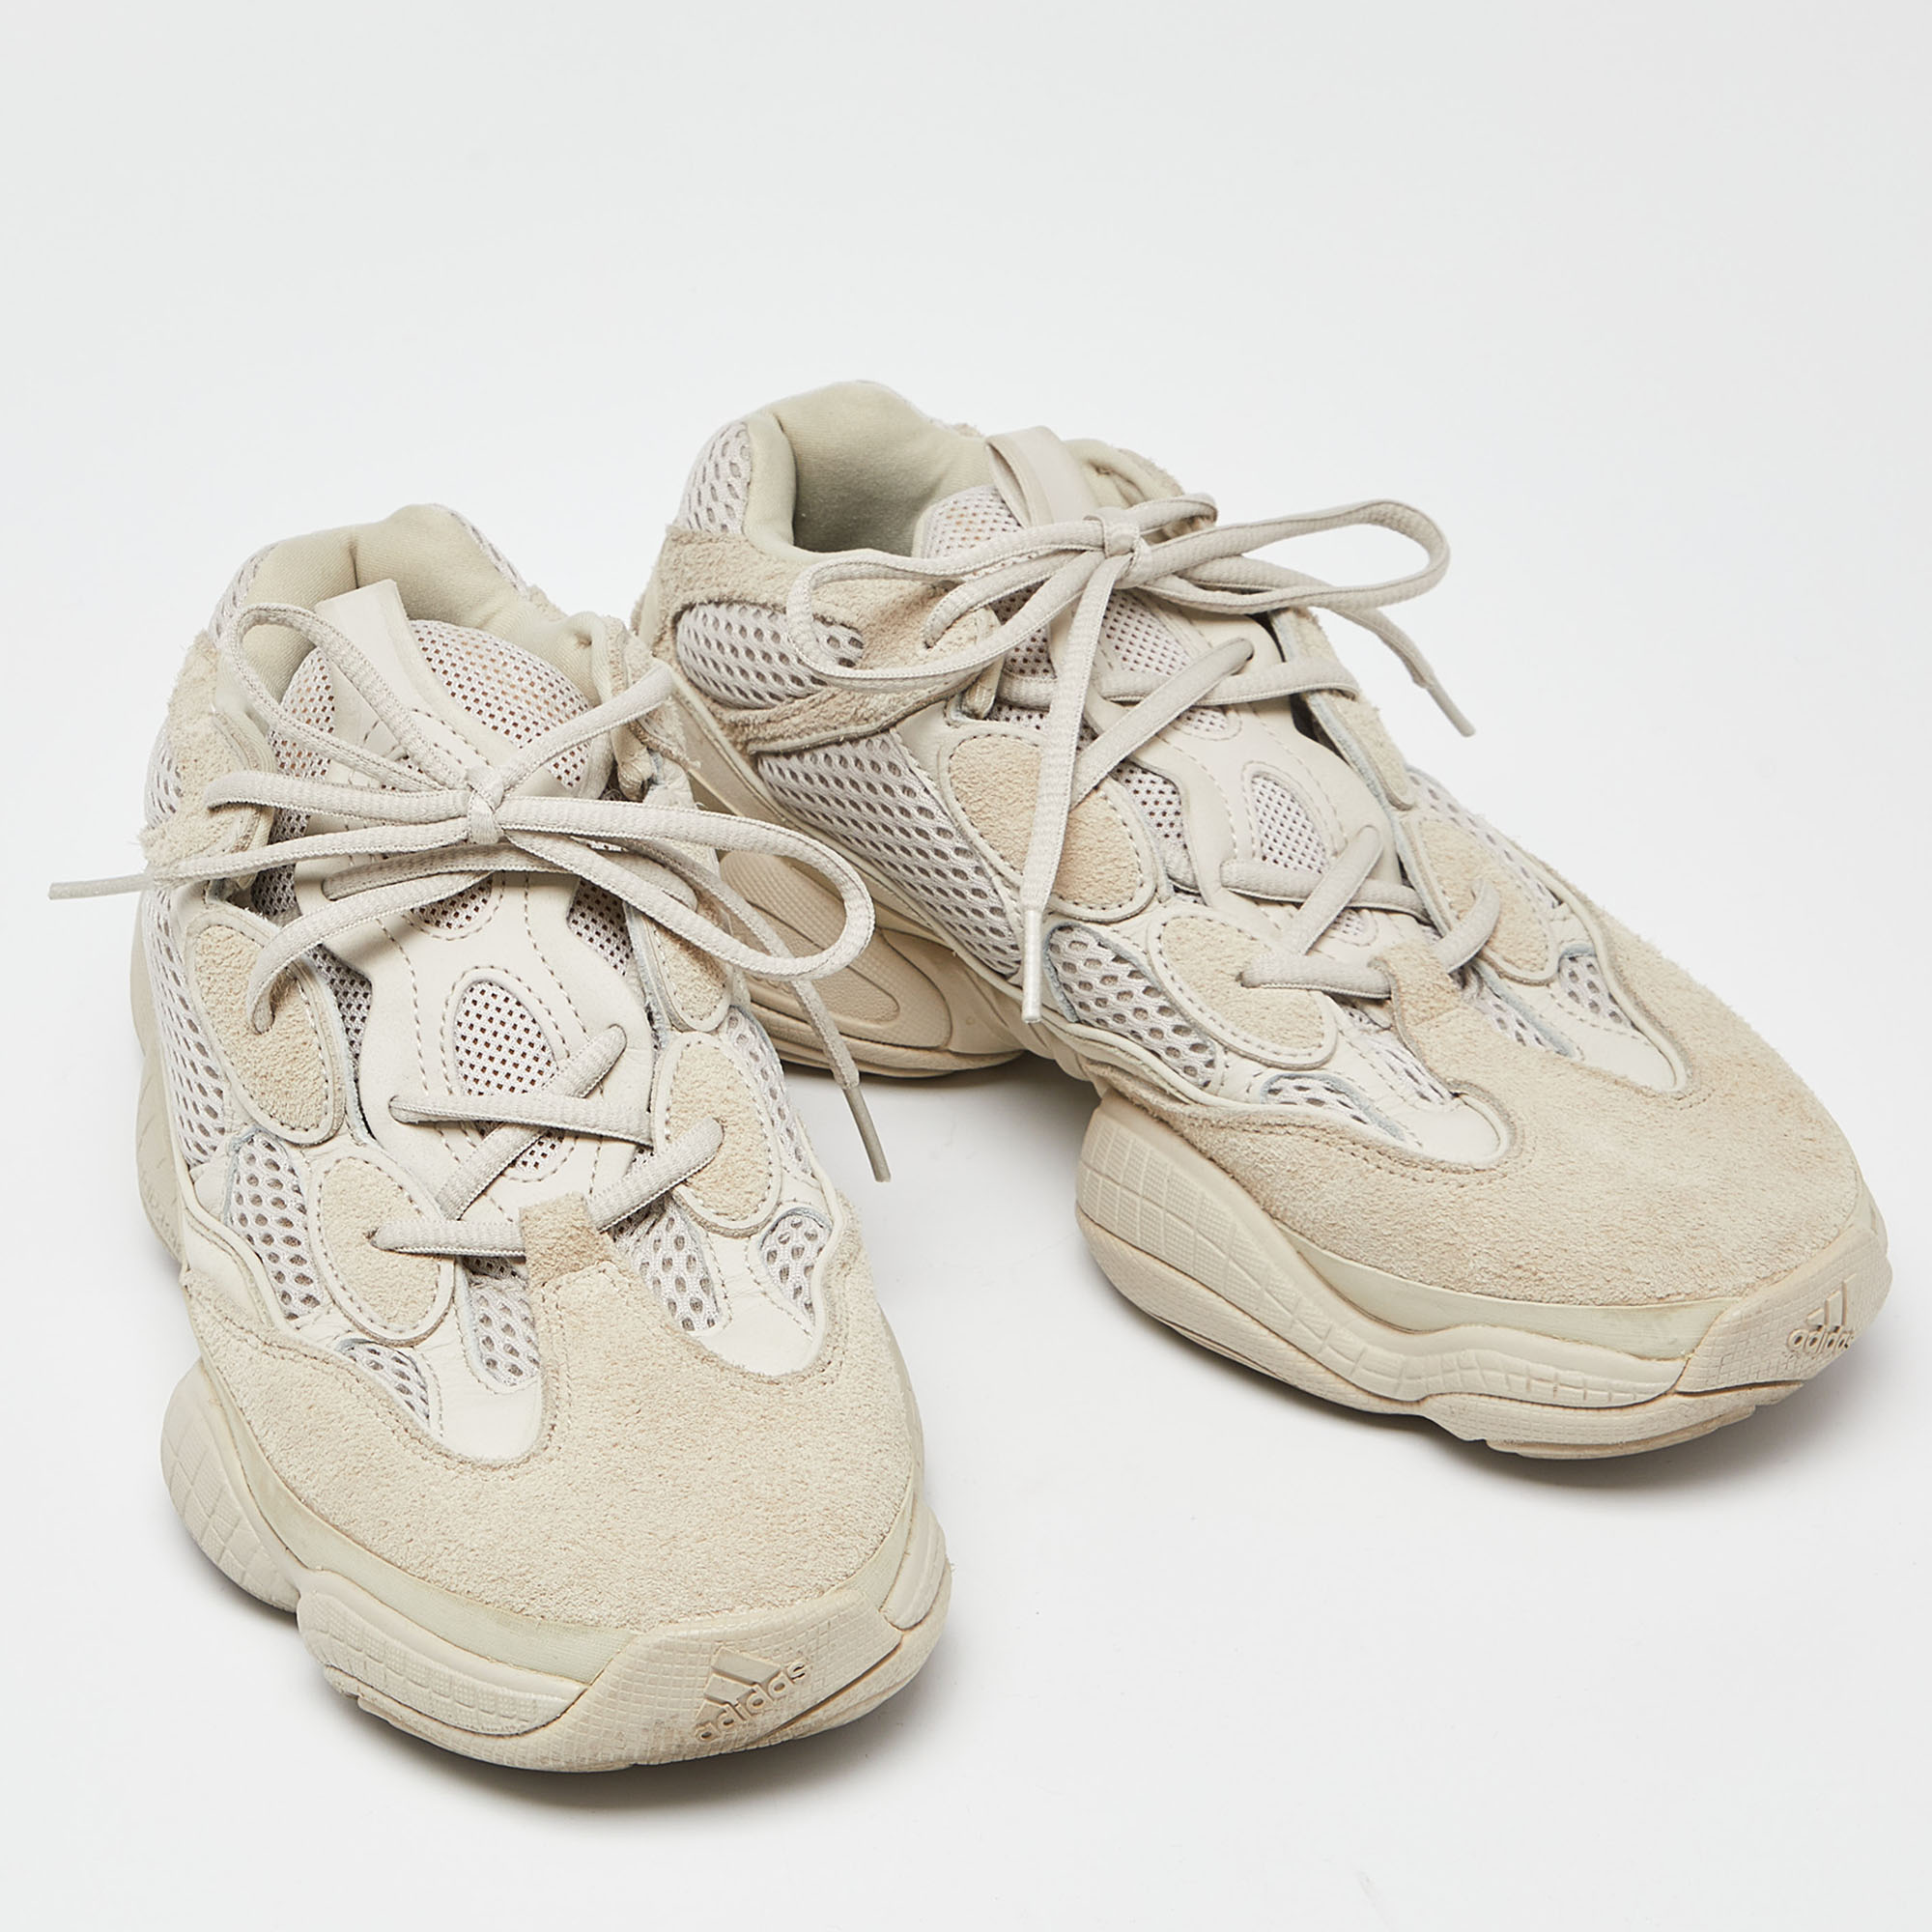 Yeezy X Adidas Cream Suede And Mesh Yeezy 500 Blush Sneakers Size 42